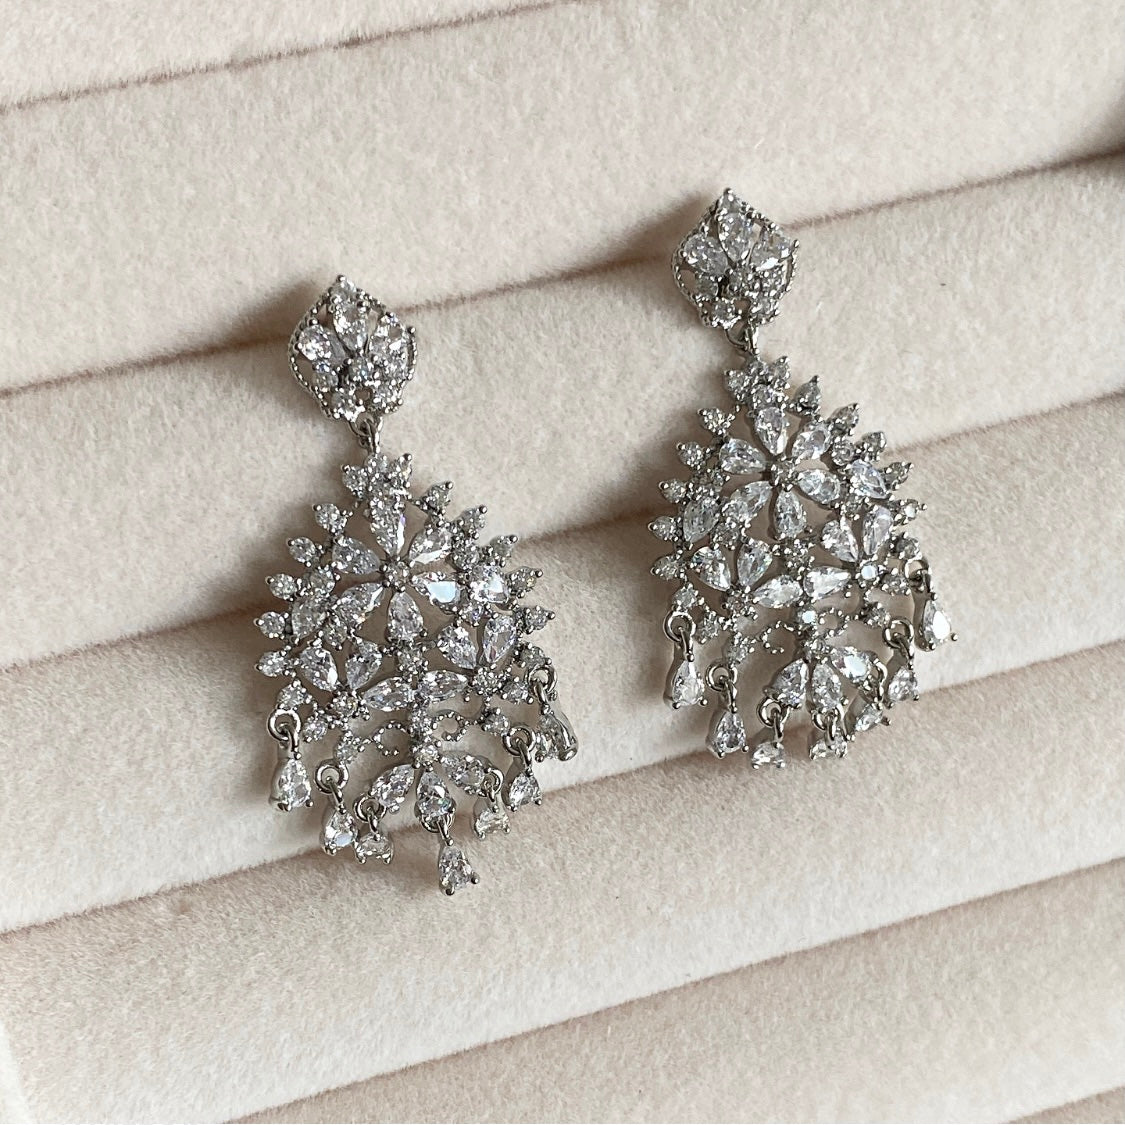 Bejewel your look with our Dawn Crystal Drop Earrings, featuring lustrous cz crystals set in an elegant and sparkly design. This luxurious piece of jewelry adds a touch of refinement that exudes beauty and sophistication.